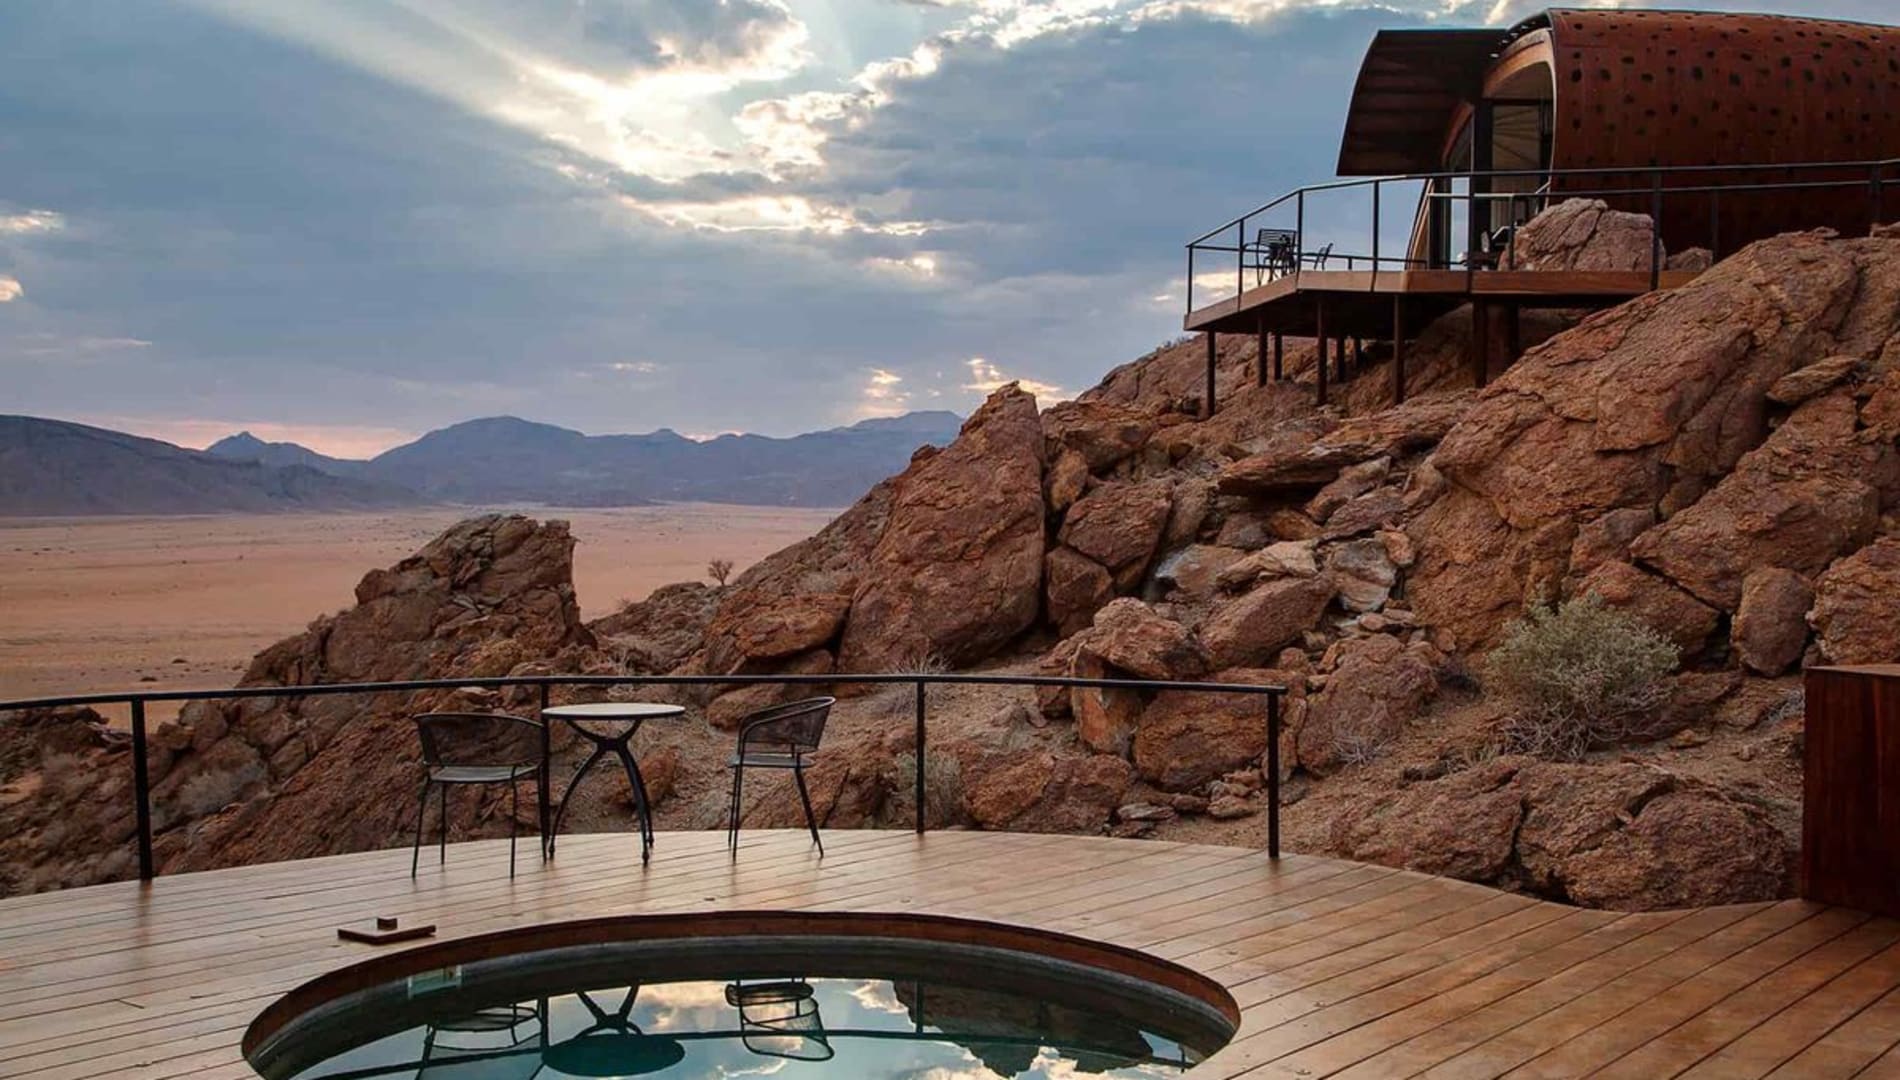 Namibia's Romantic Safari Retreats: Intimacy and Luxury in the Wilderness